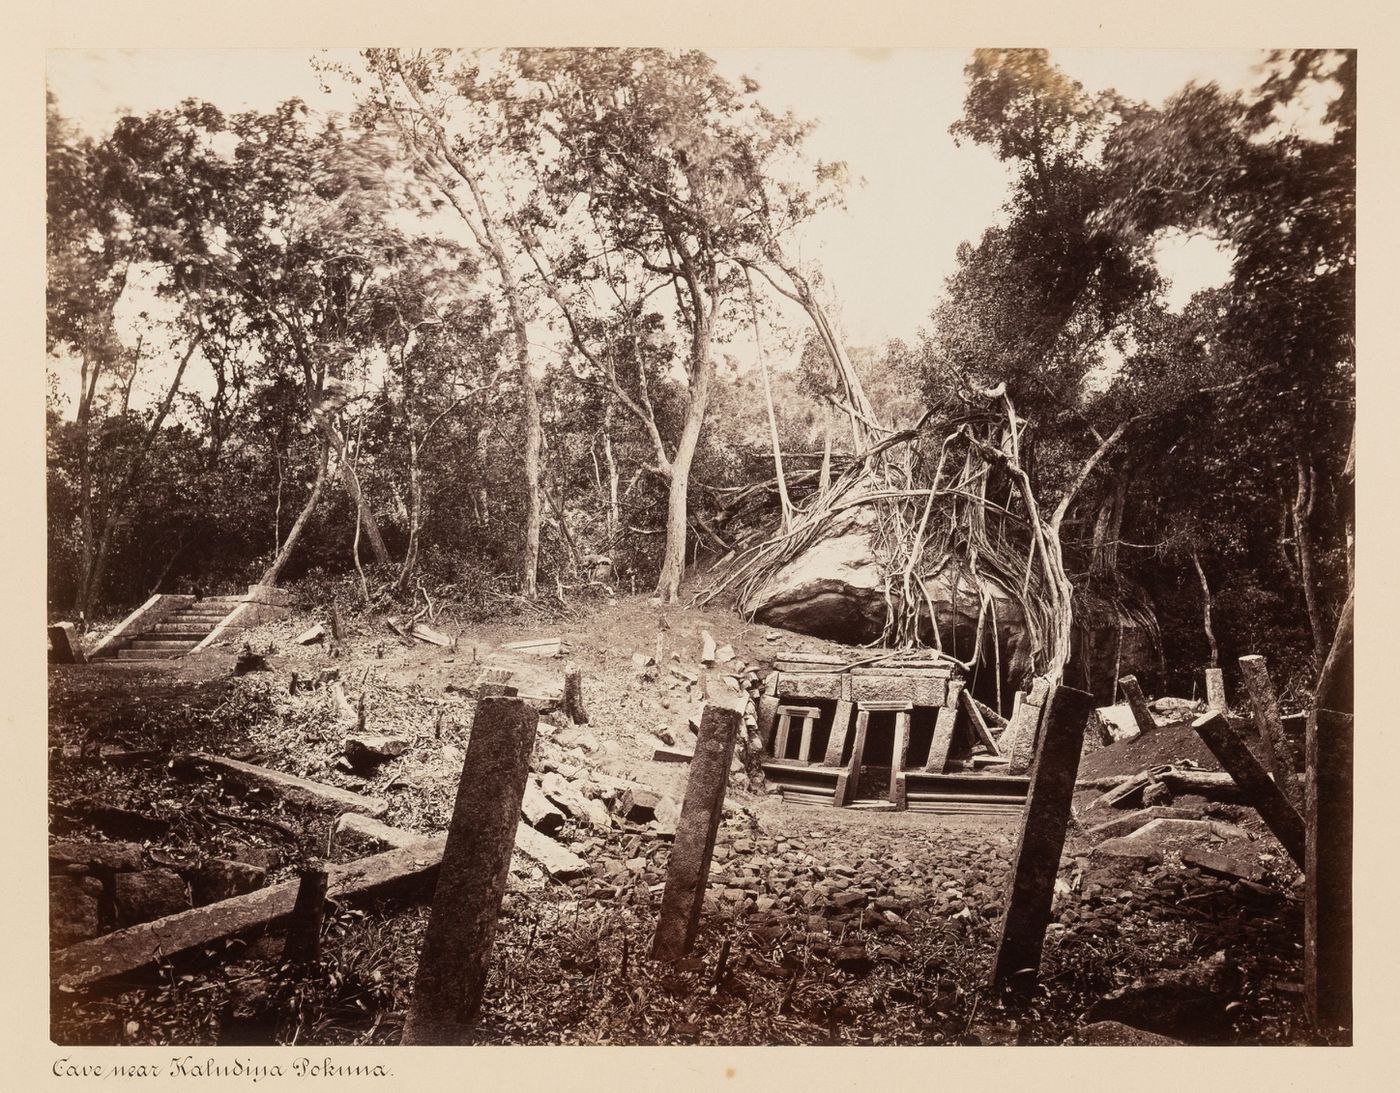 View of a cave temple [?] with a staircase on the left and ruins in the foreground, near the Kaludiya Pokuna [bathing pool], Mihintale, Ceylon (now Sri Lanka)